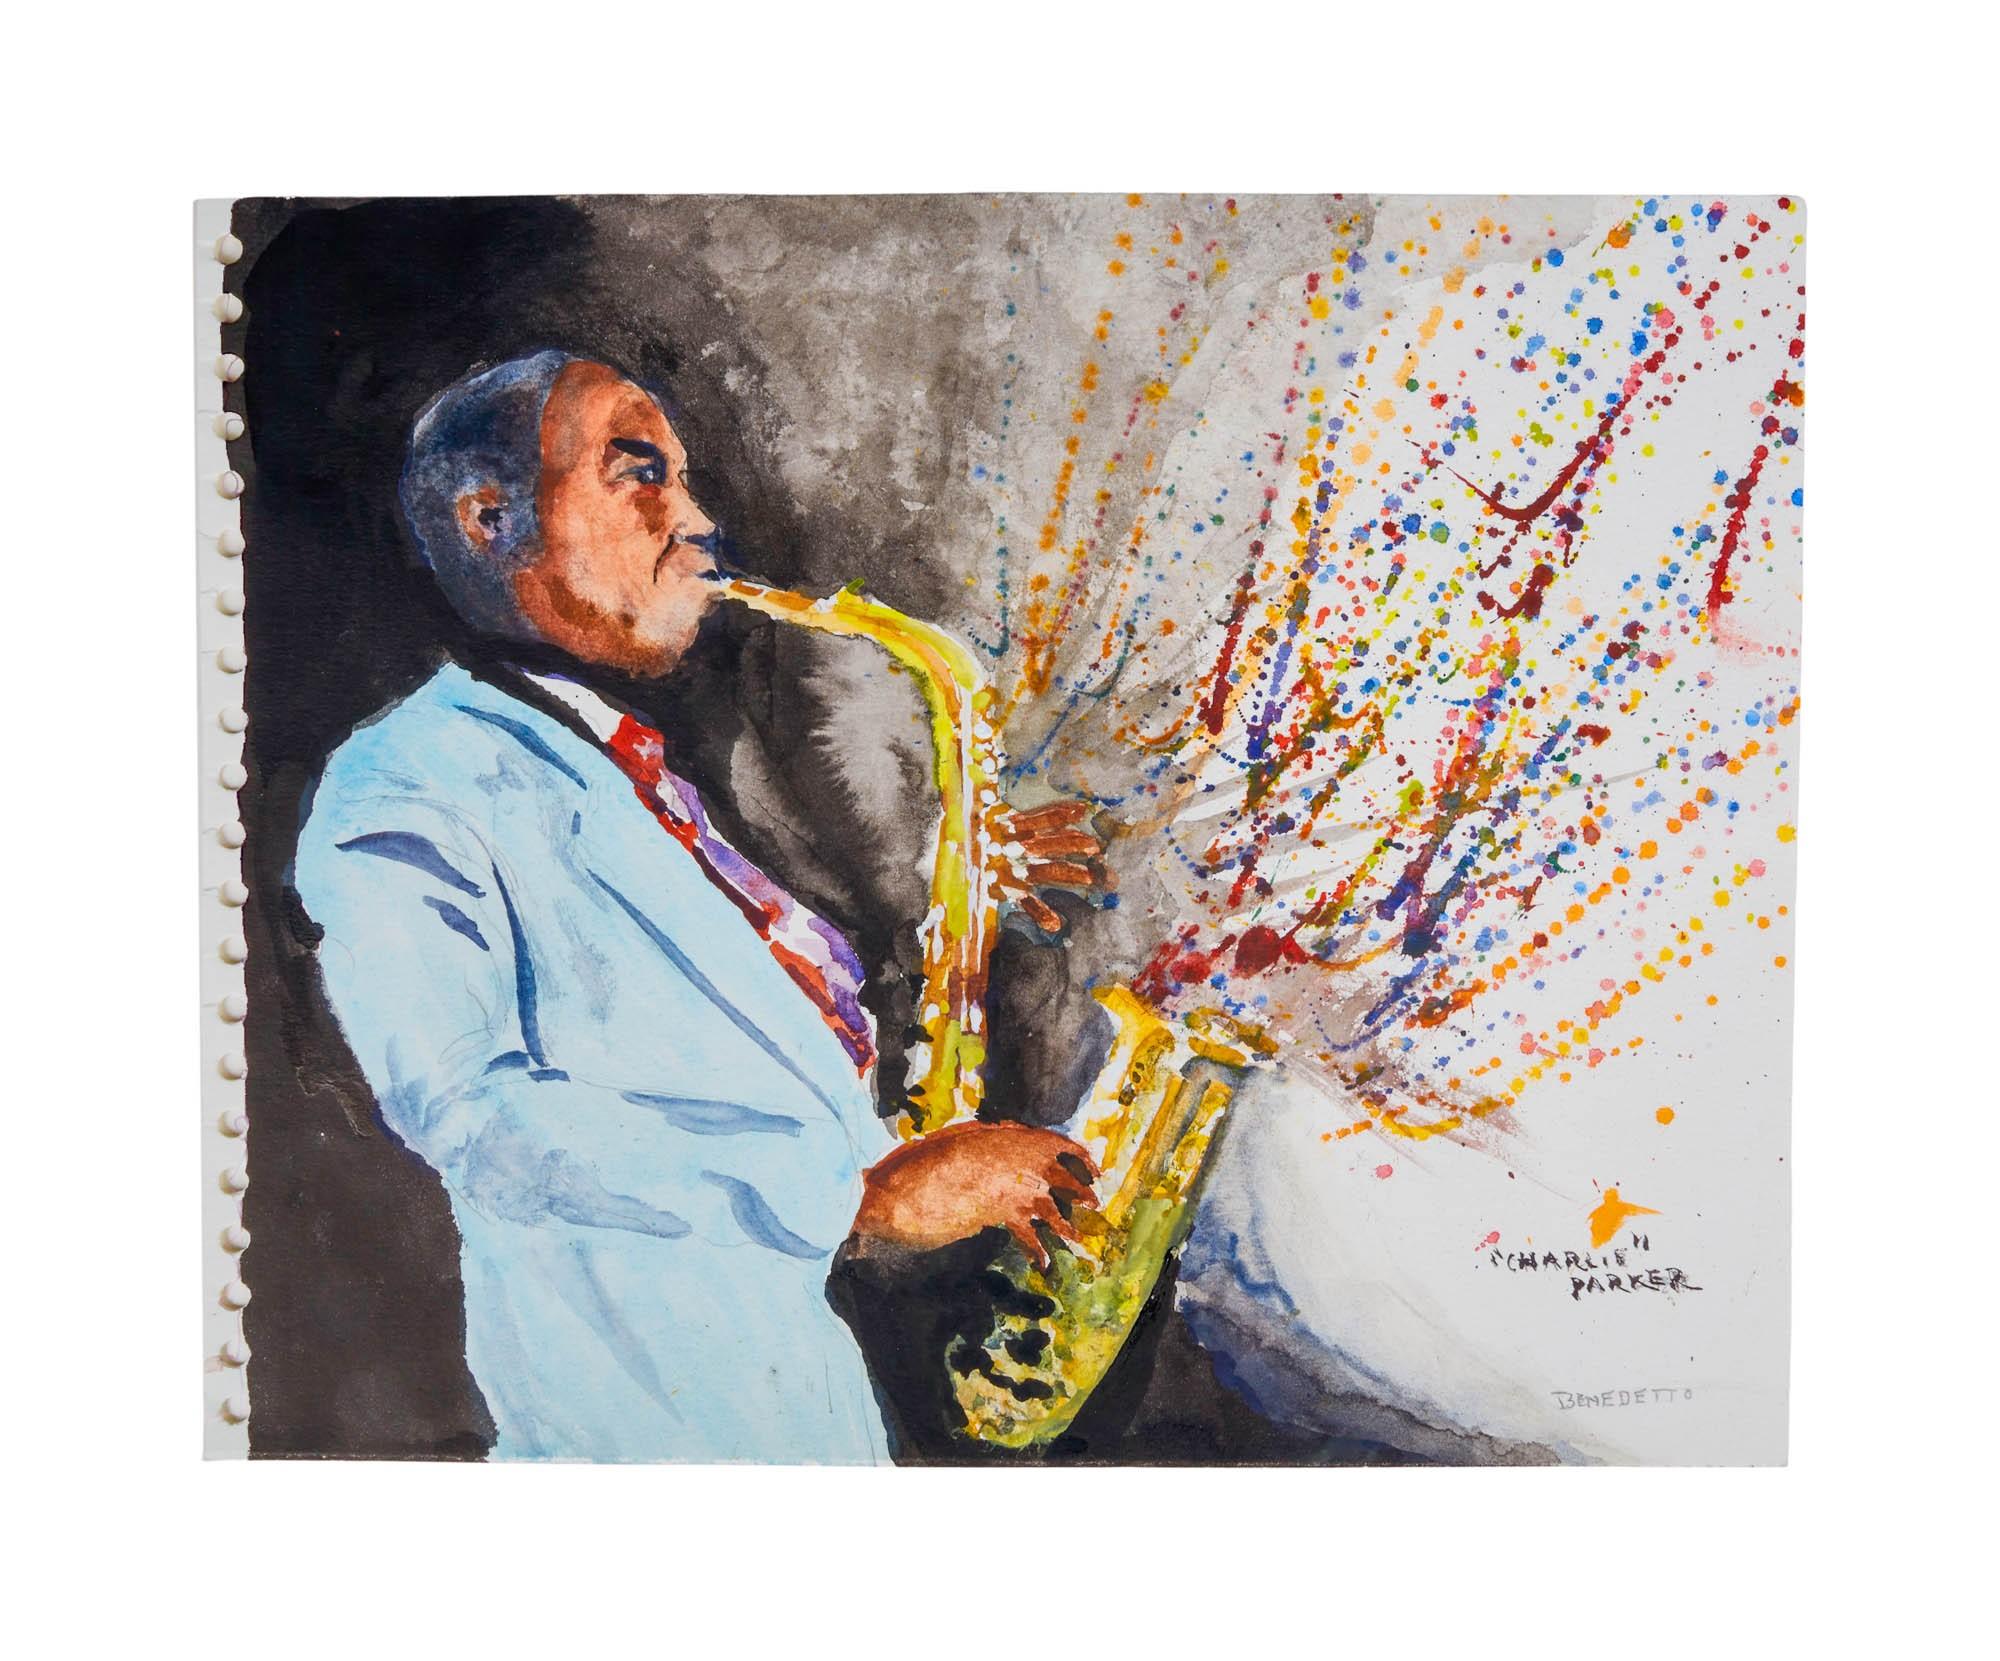 it is a painting of a man playing a saxophone .